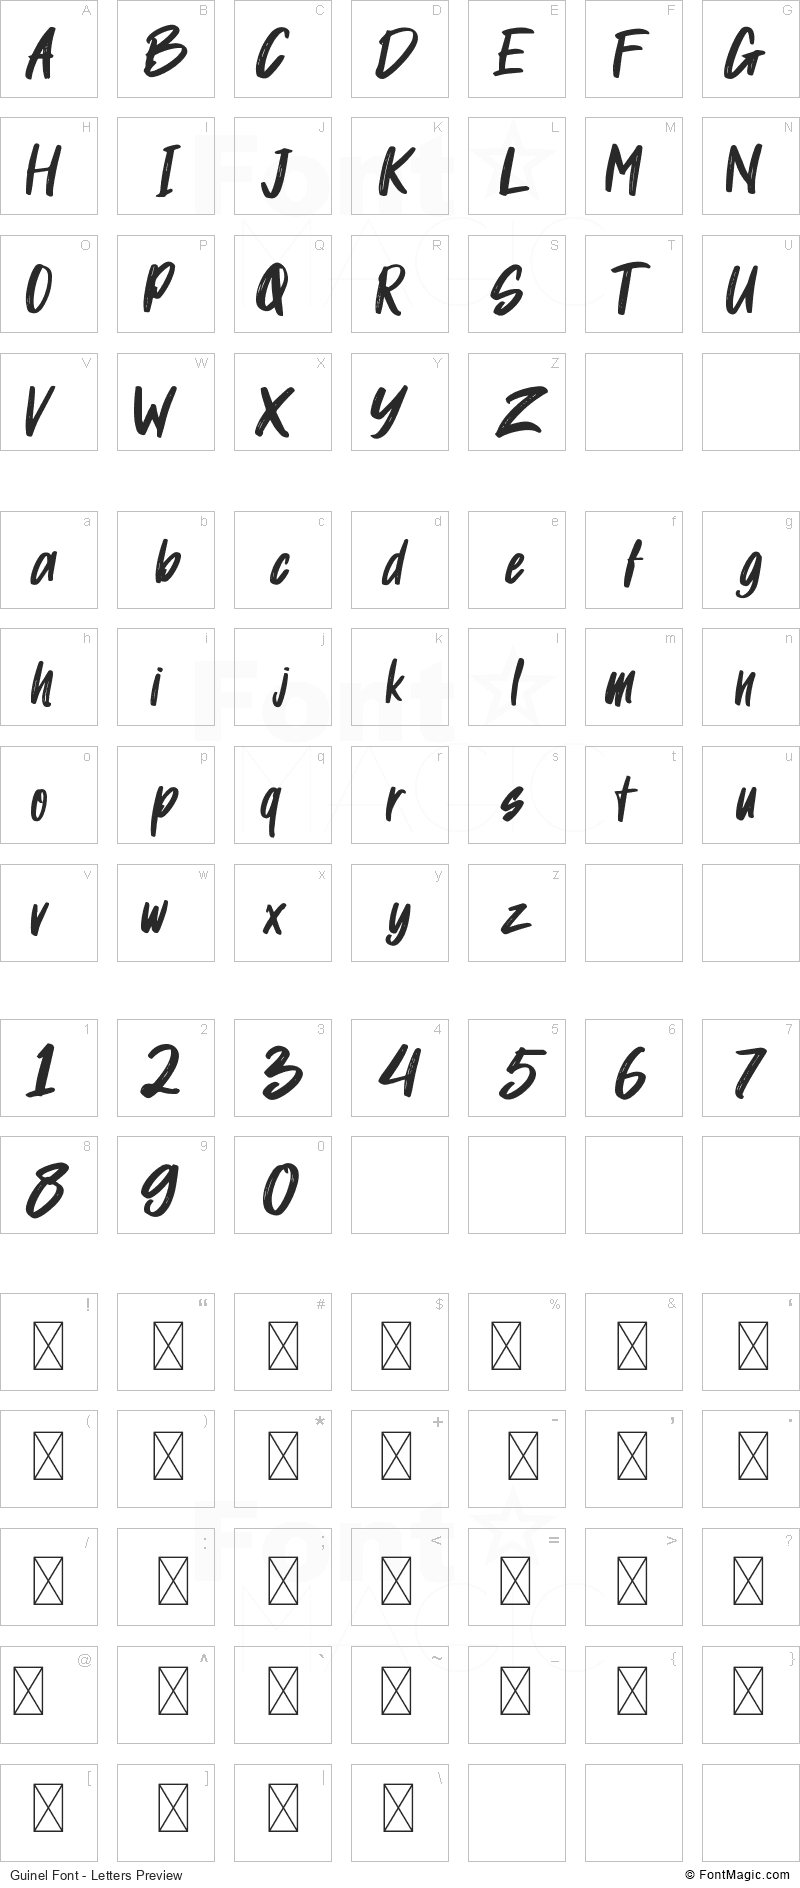 Guinel Font - All Latters Preview Chart